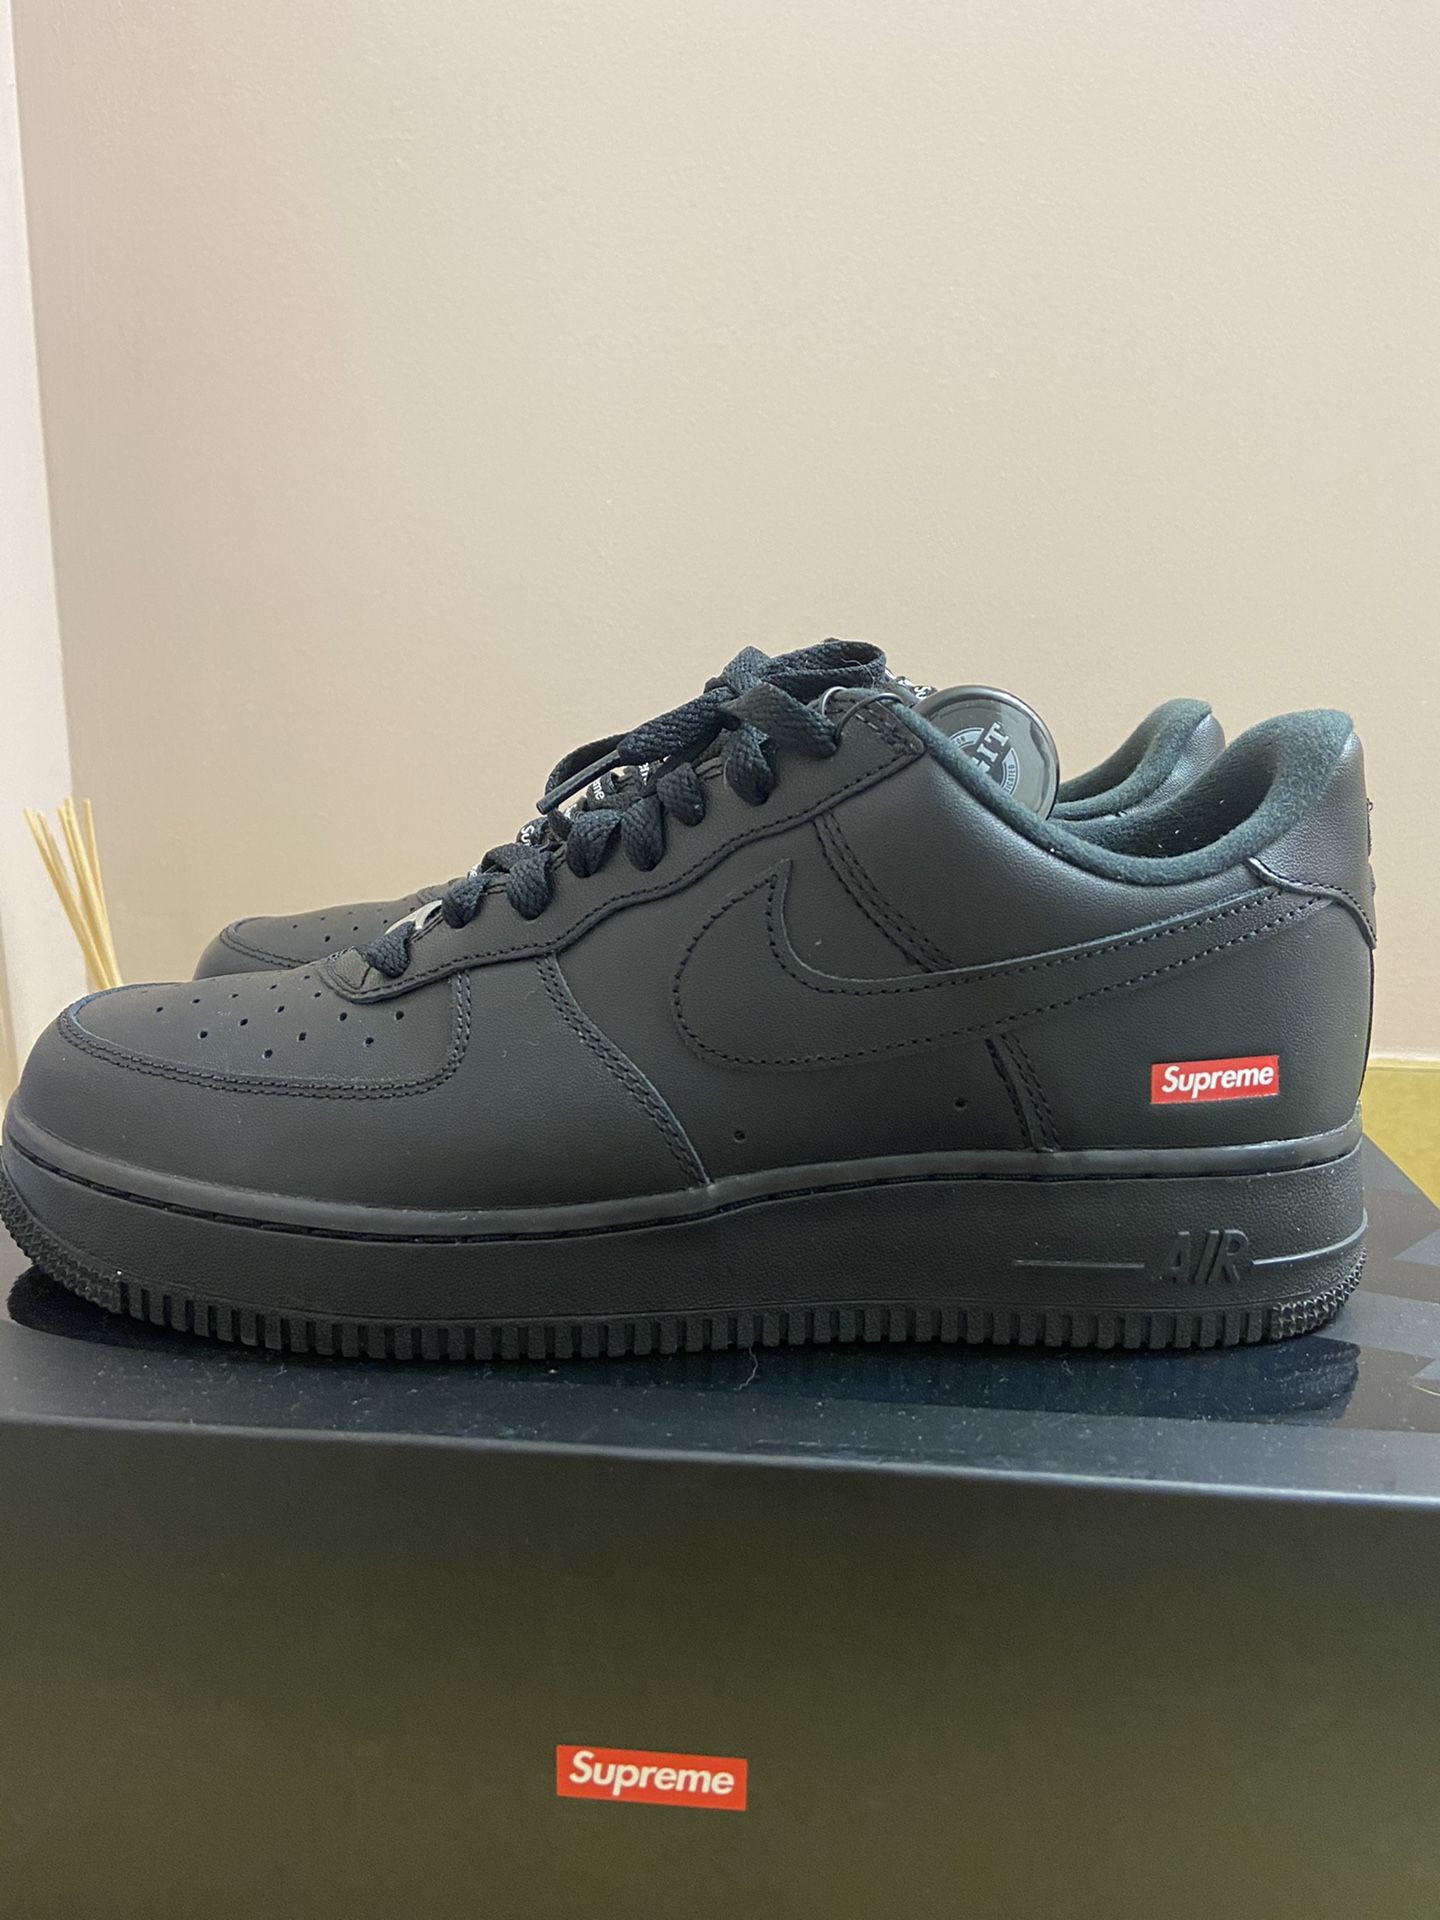 Authentic Nike Air Force 1 Low Supreme black Size 9 GREAT CONDITION